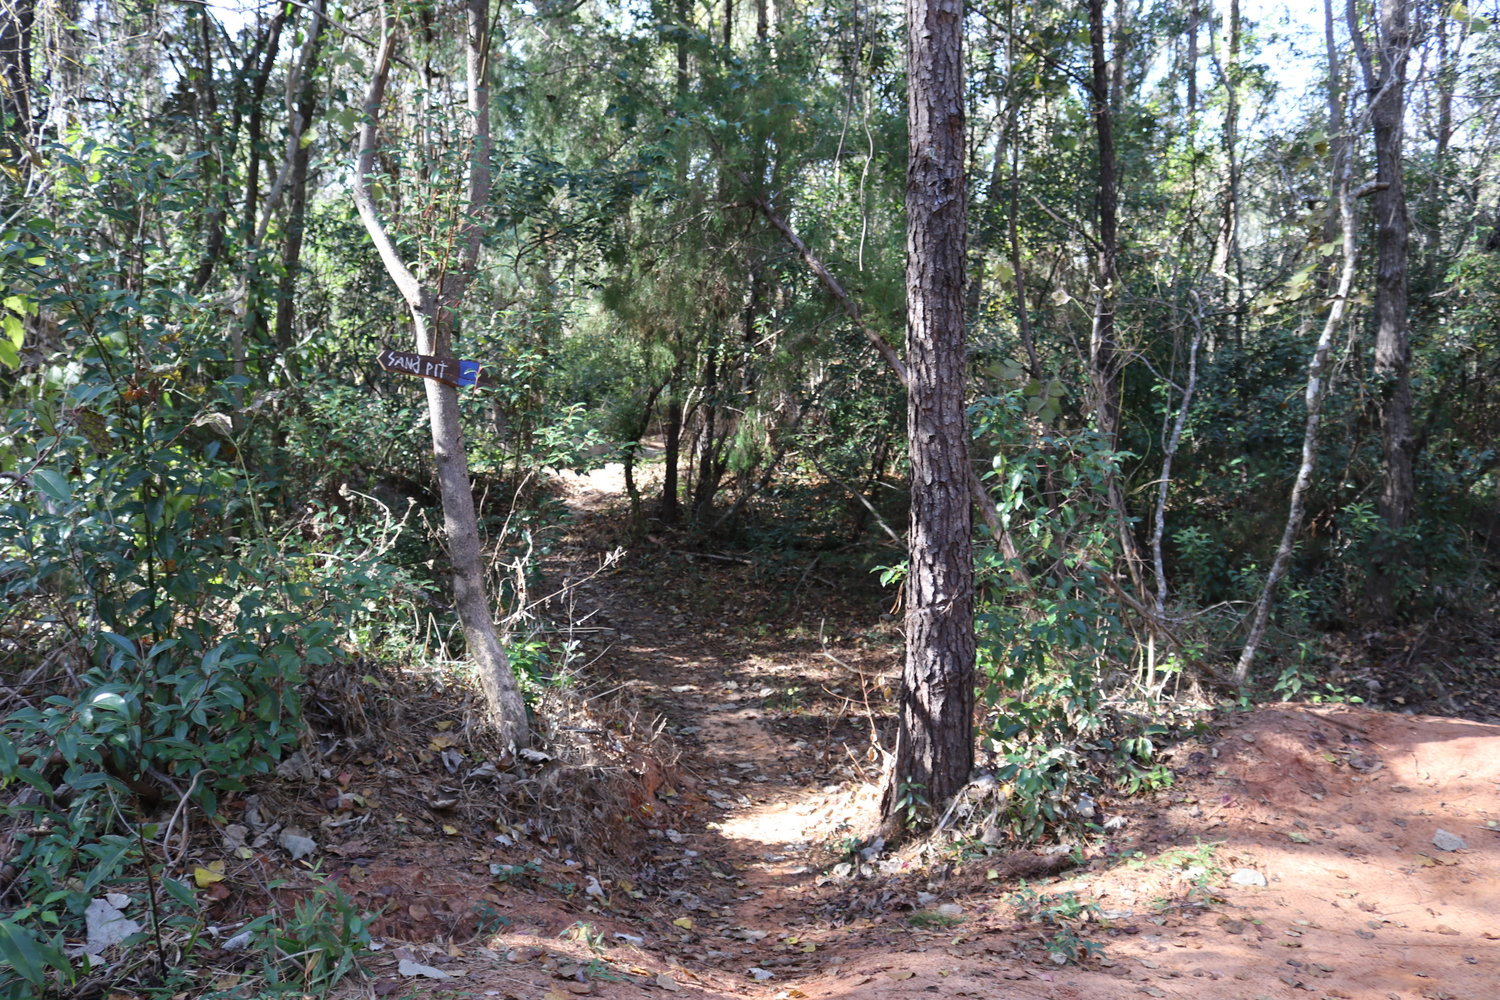 Trails extend into the Dyas Triangle in Fairhope. City officials are working to prepare plans to develop the property as a municipal nature park.